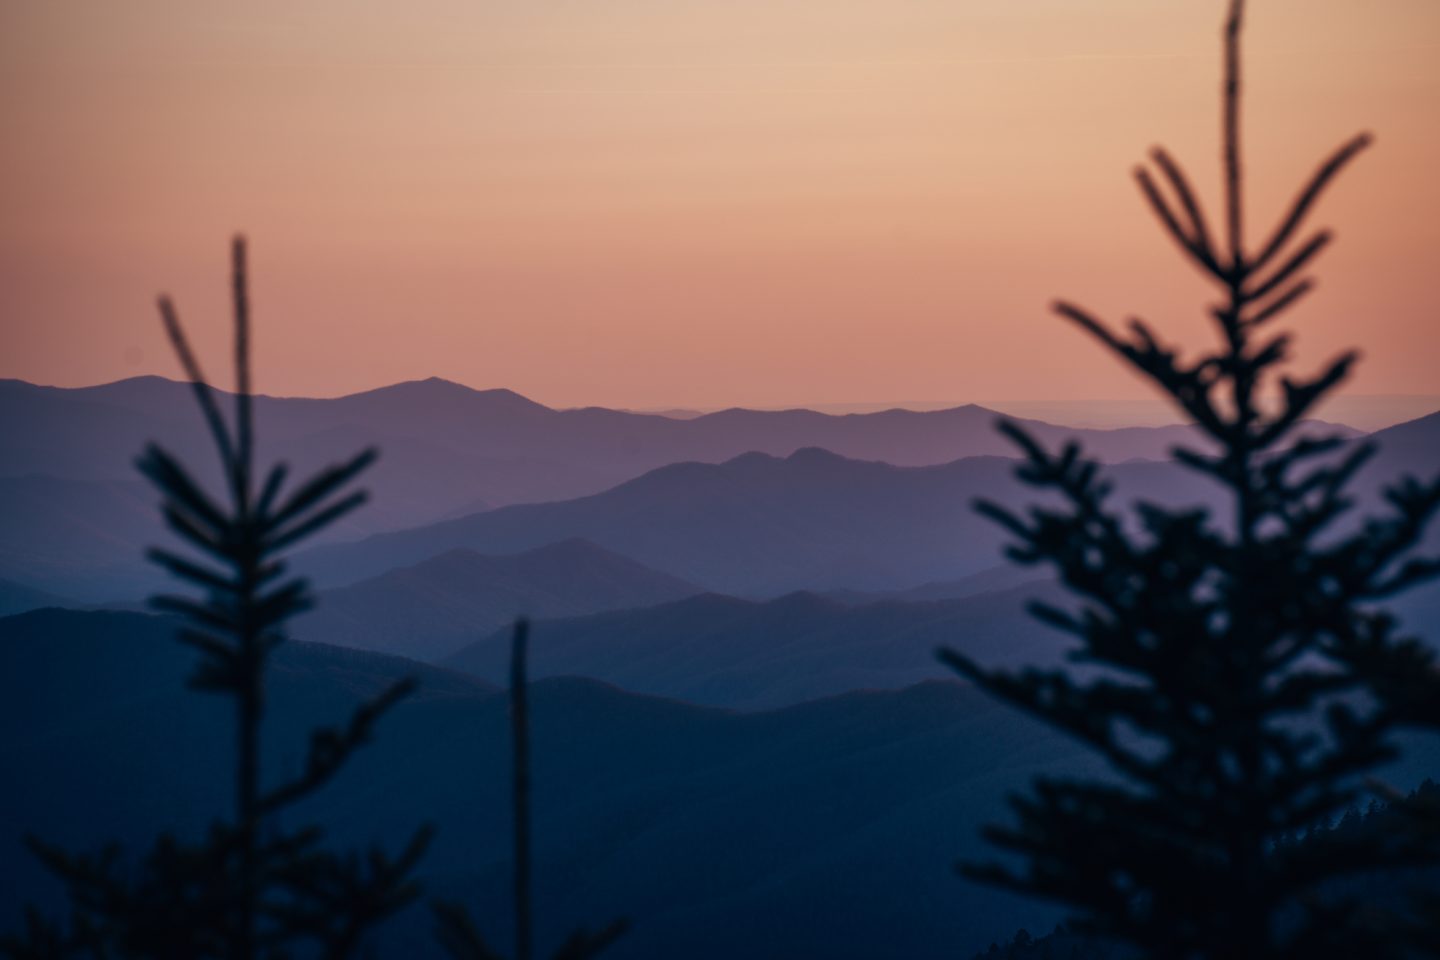 Clingman's Dome View - Great Smoky Mountains National Park, Tennessee/North Carolina